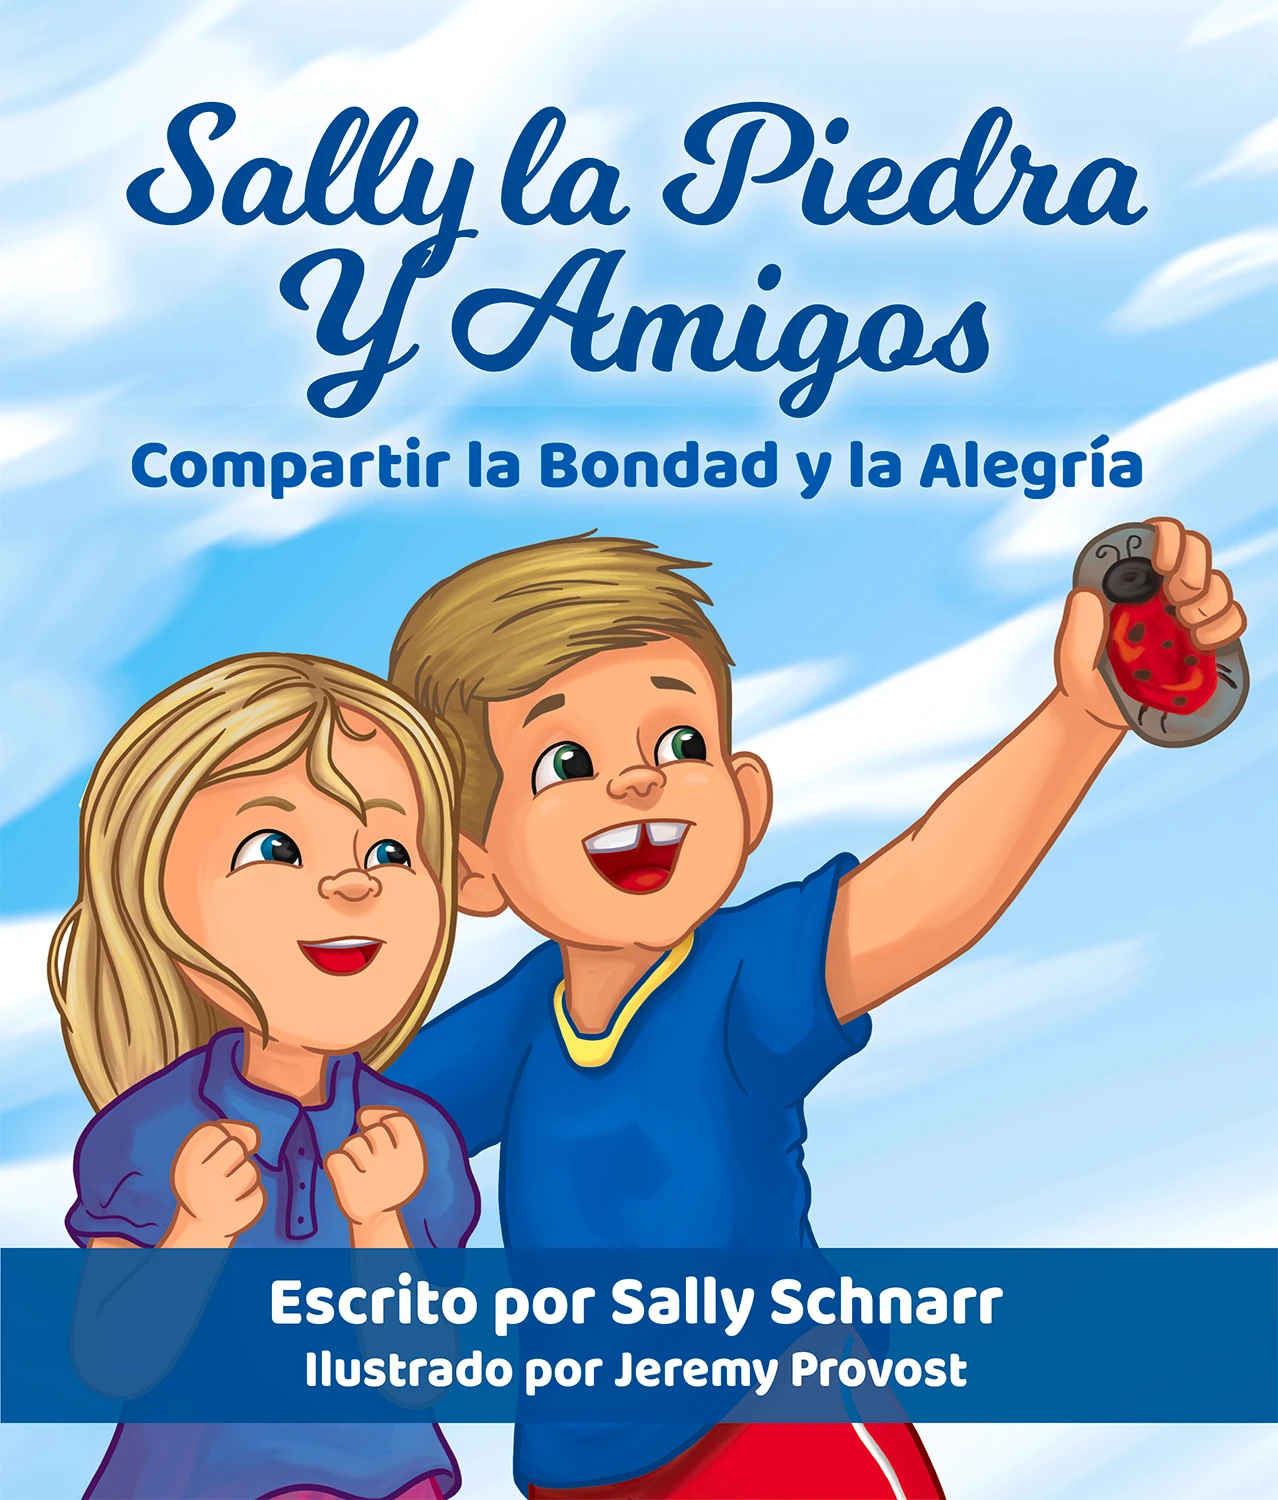 SALLY THE STONE BOOK COVER